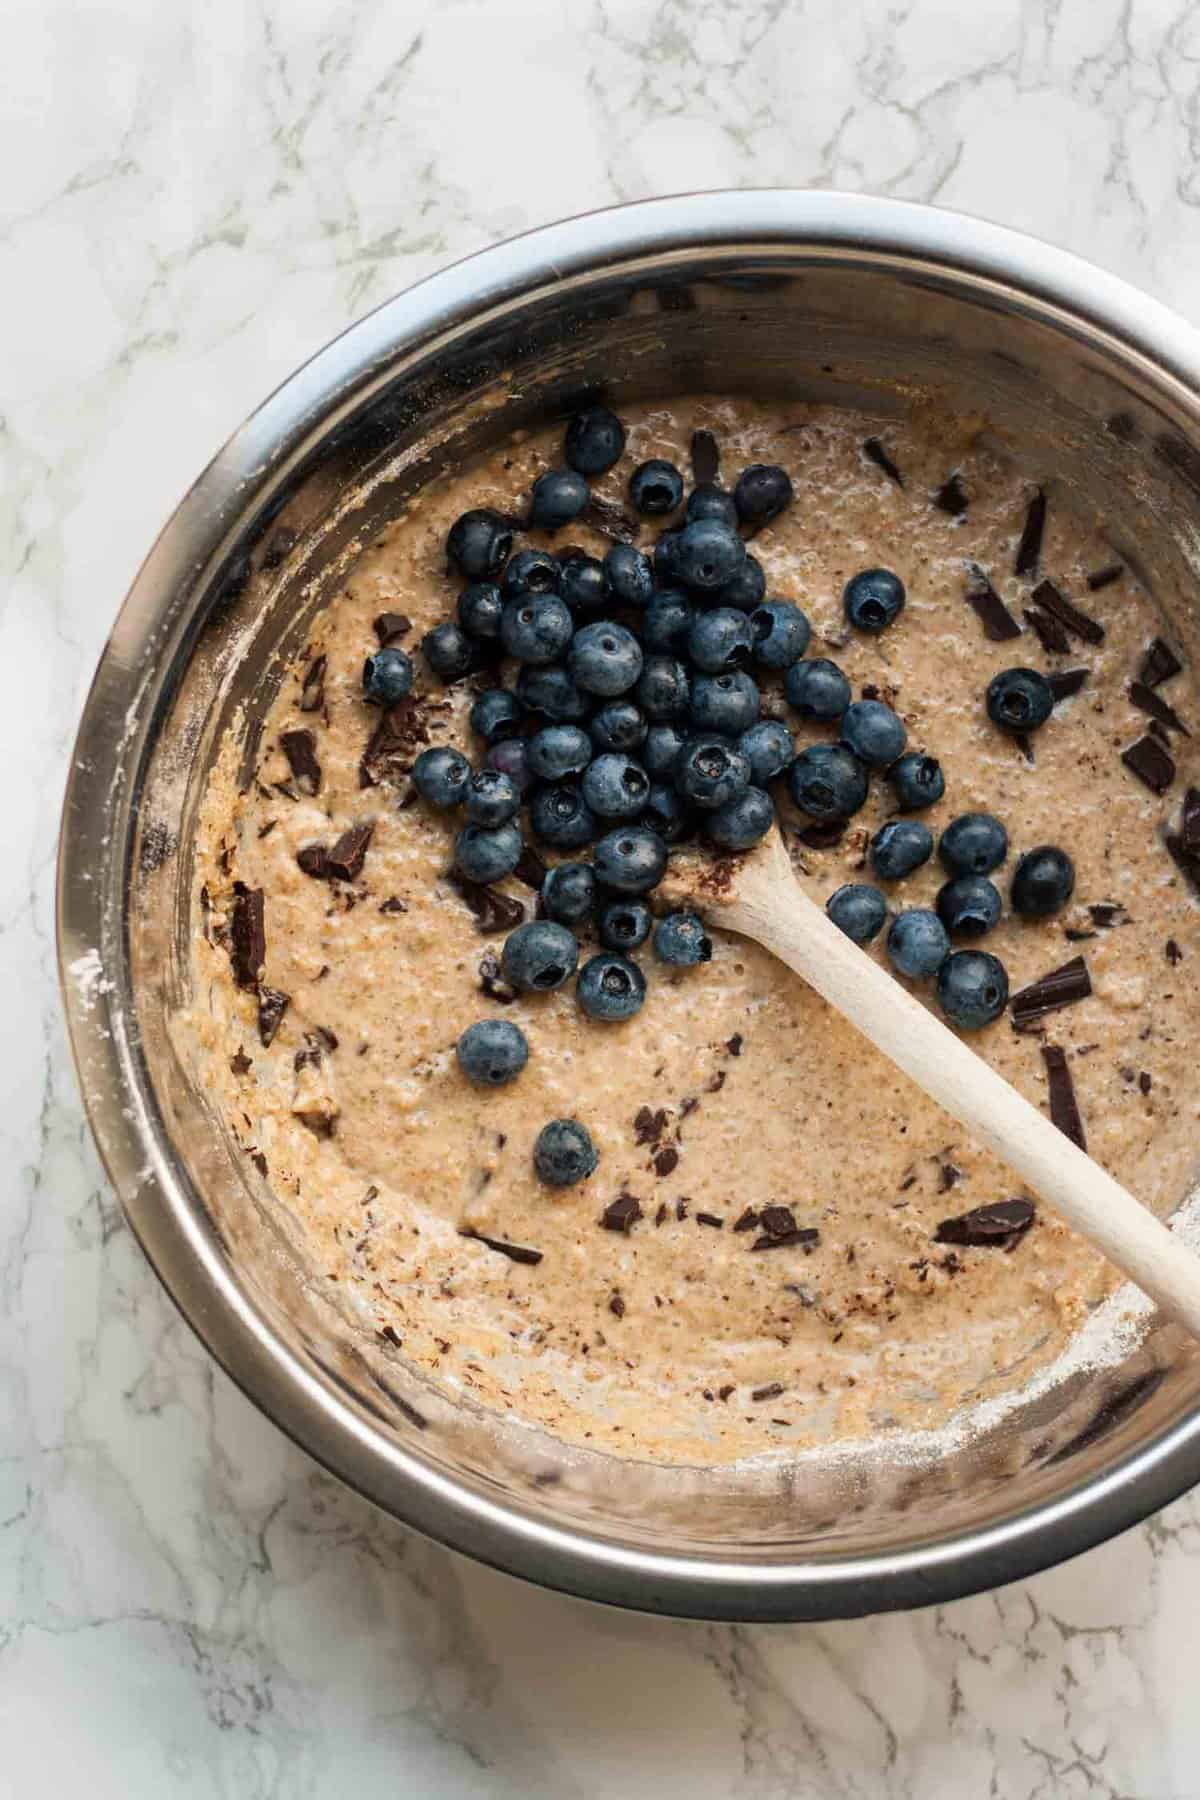 A bowl of muffin batter with blueberries being stirred into it with a wooden spoon.